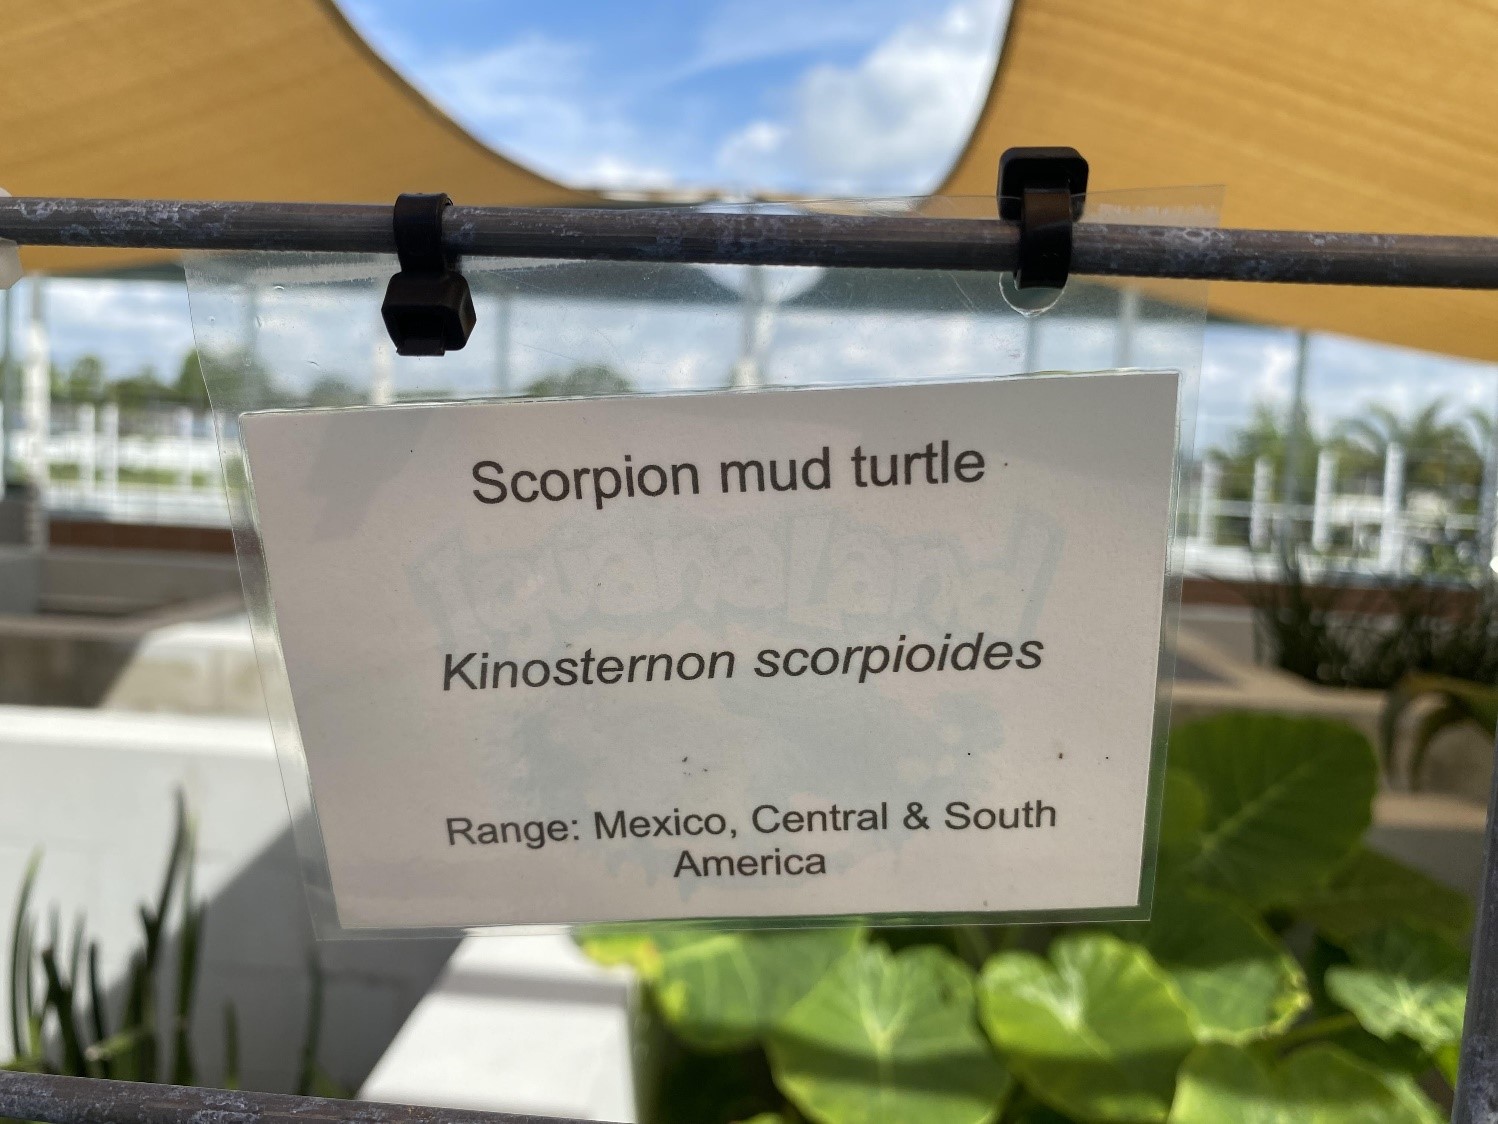 The species label for the "scorpion mud turtle" on display at the park.